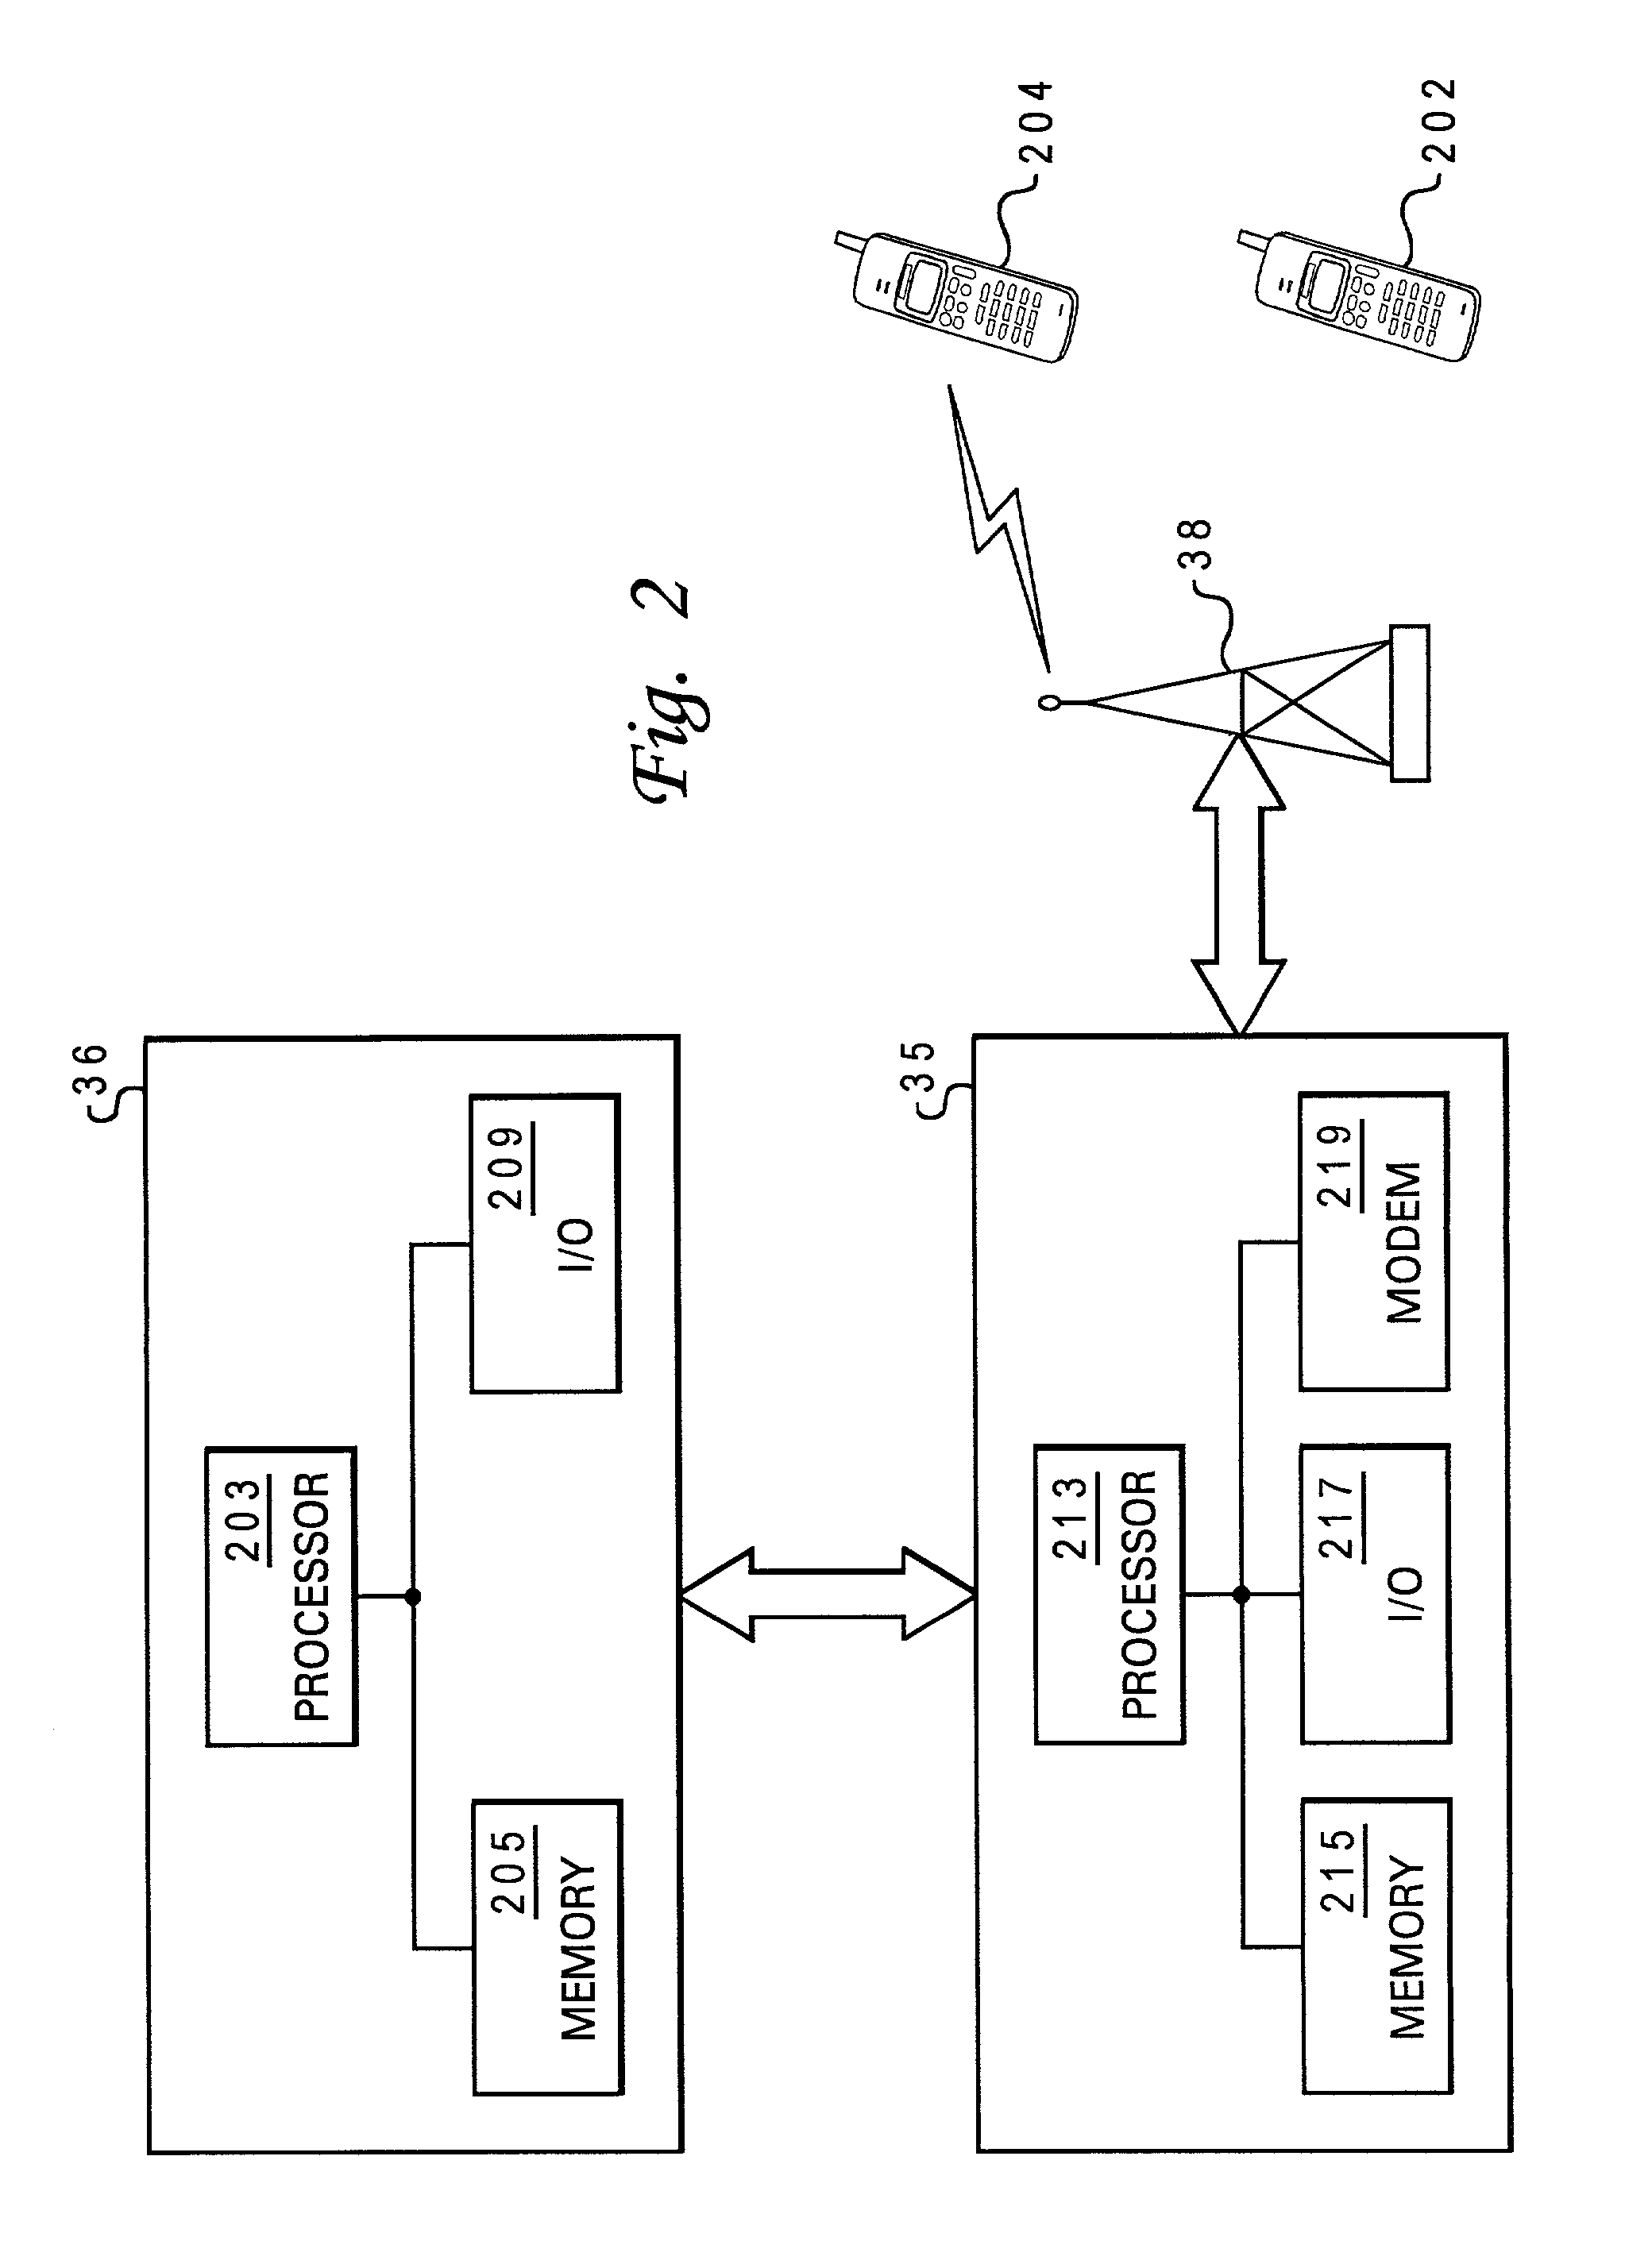 Service-driven air interface protocol architecture for wireless systems